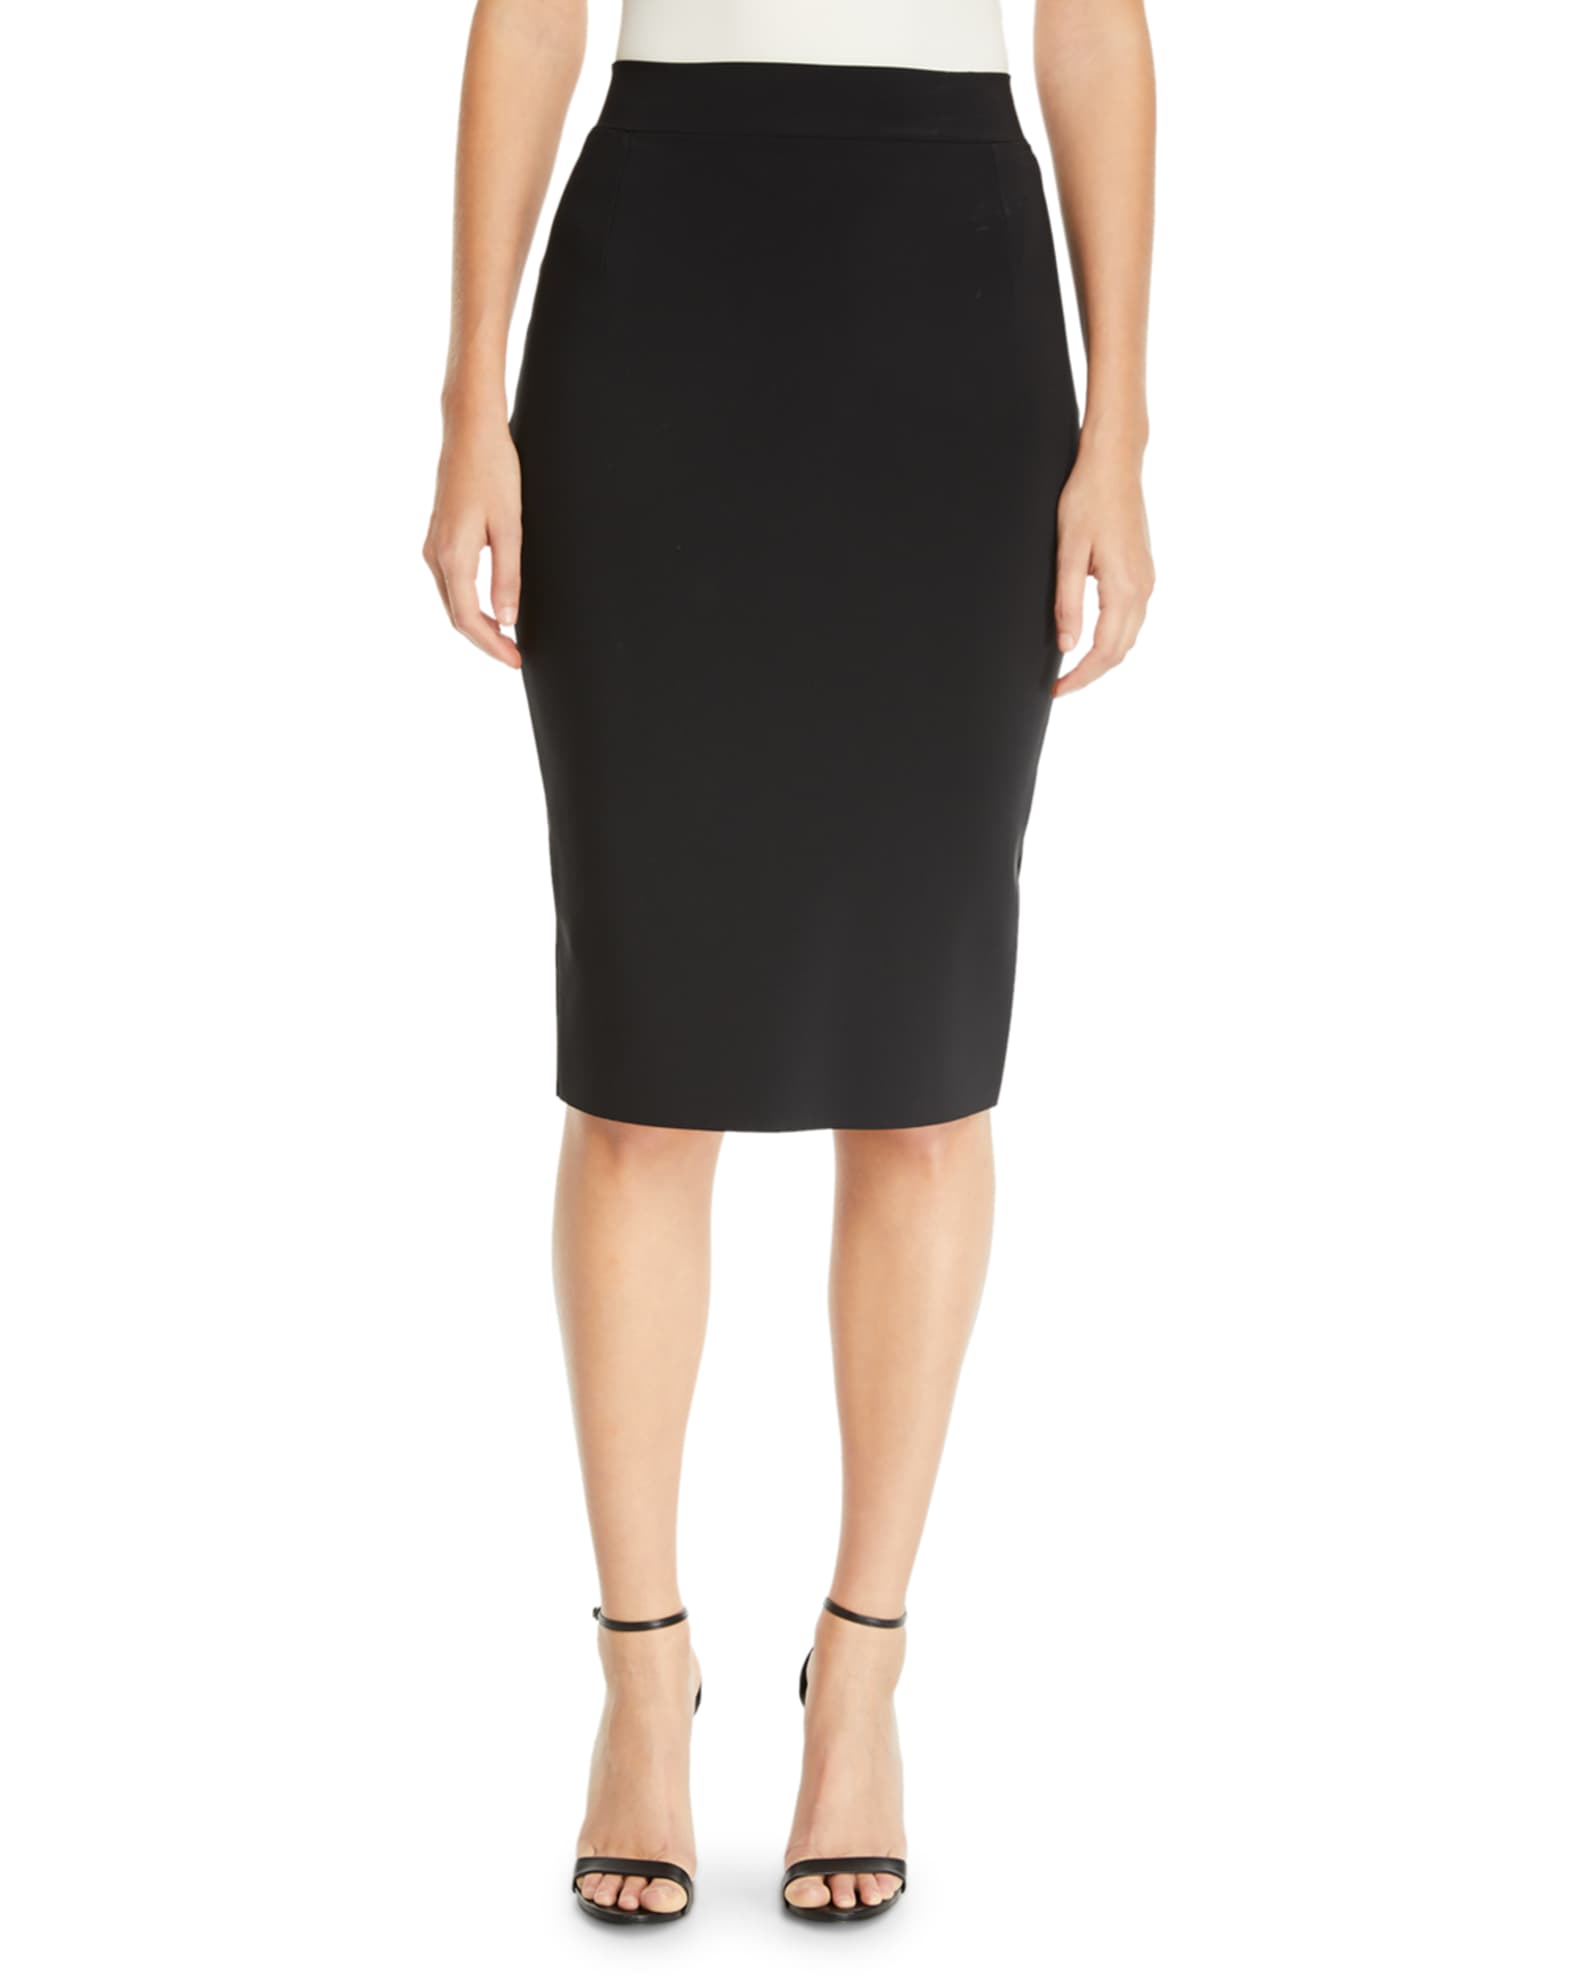 Lumi Stretch Jersey Pencil Skirt and Matching Items | Neiman Marcus